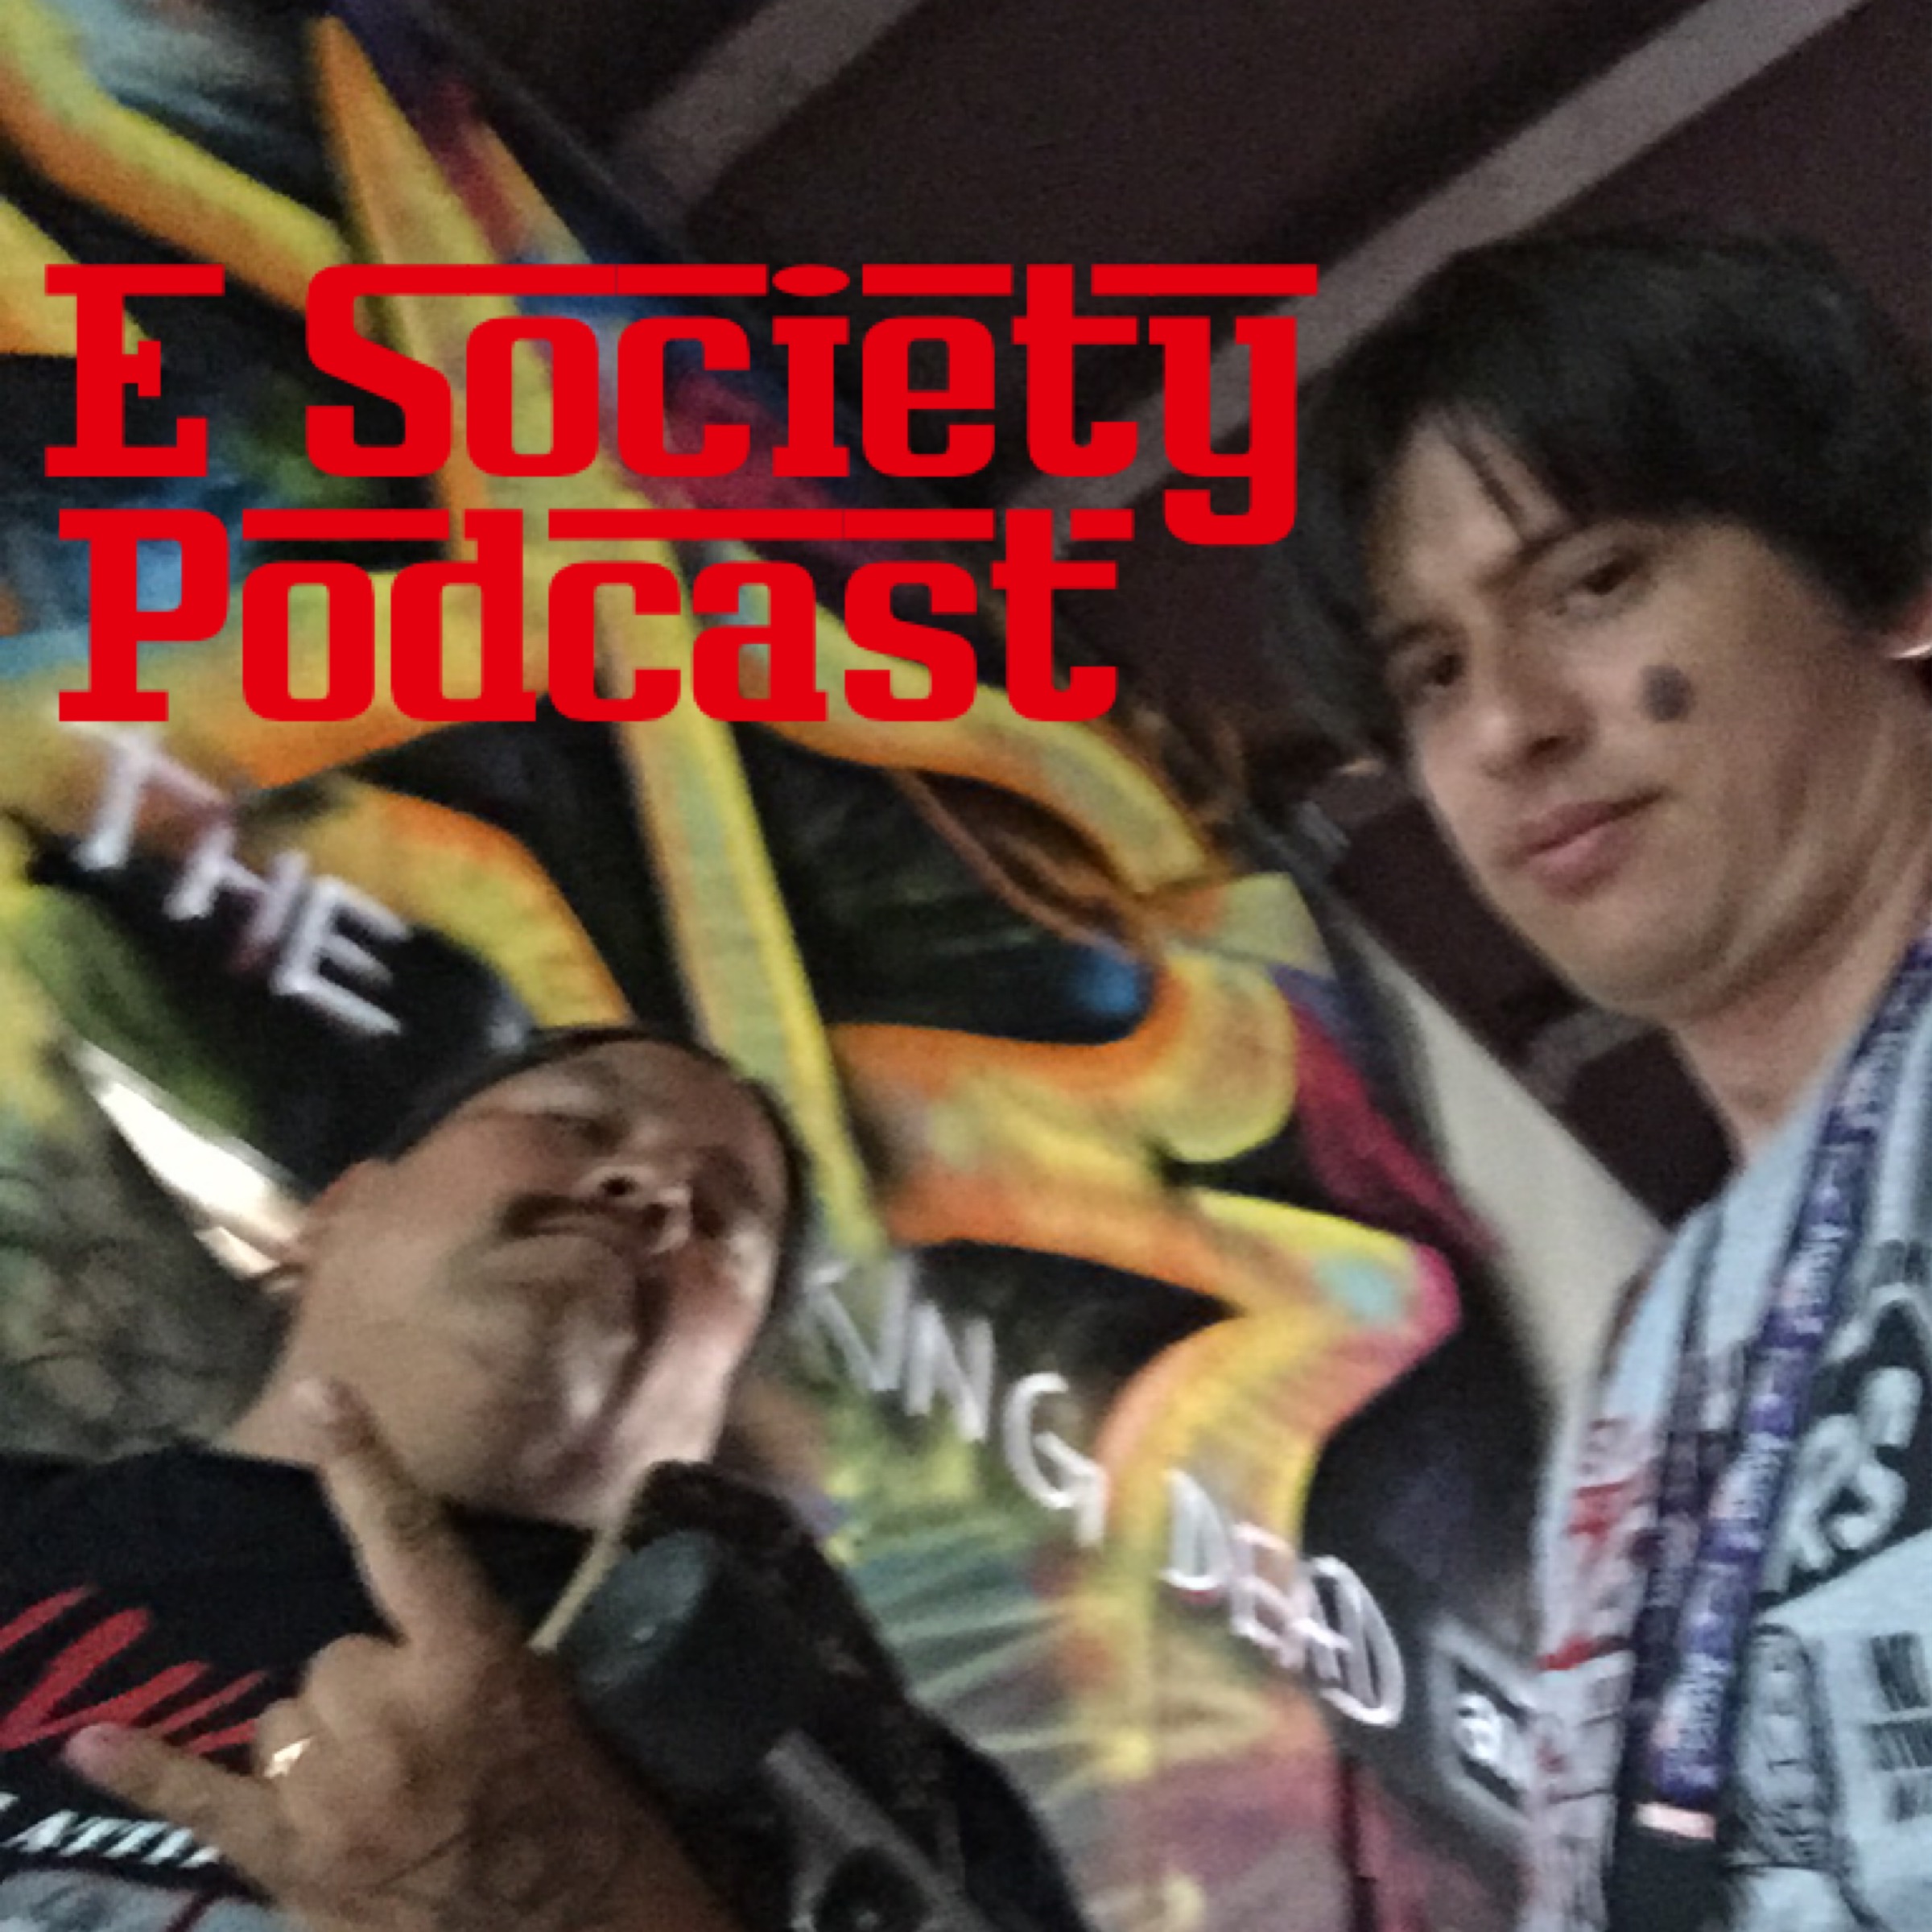 E Society Podcast - Ep. 77: ICC17 and more